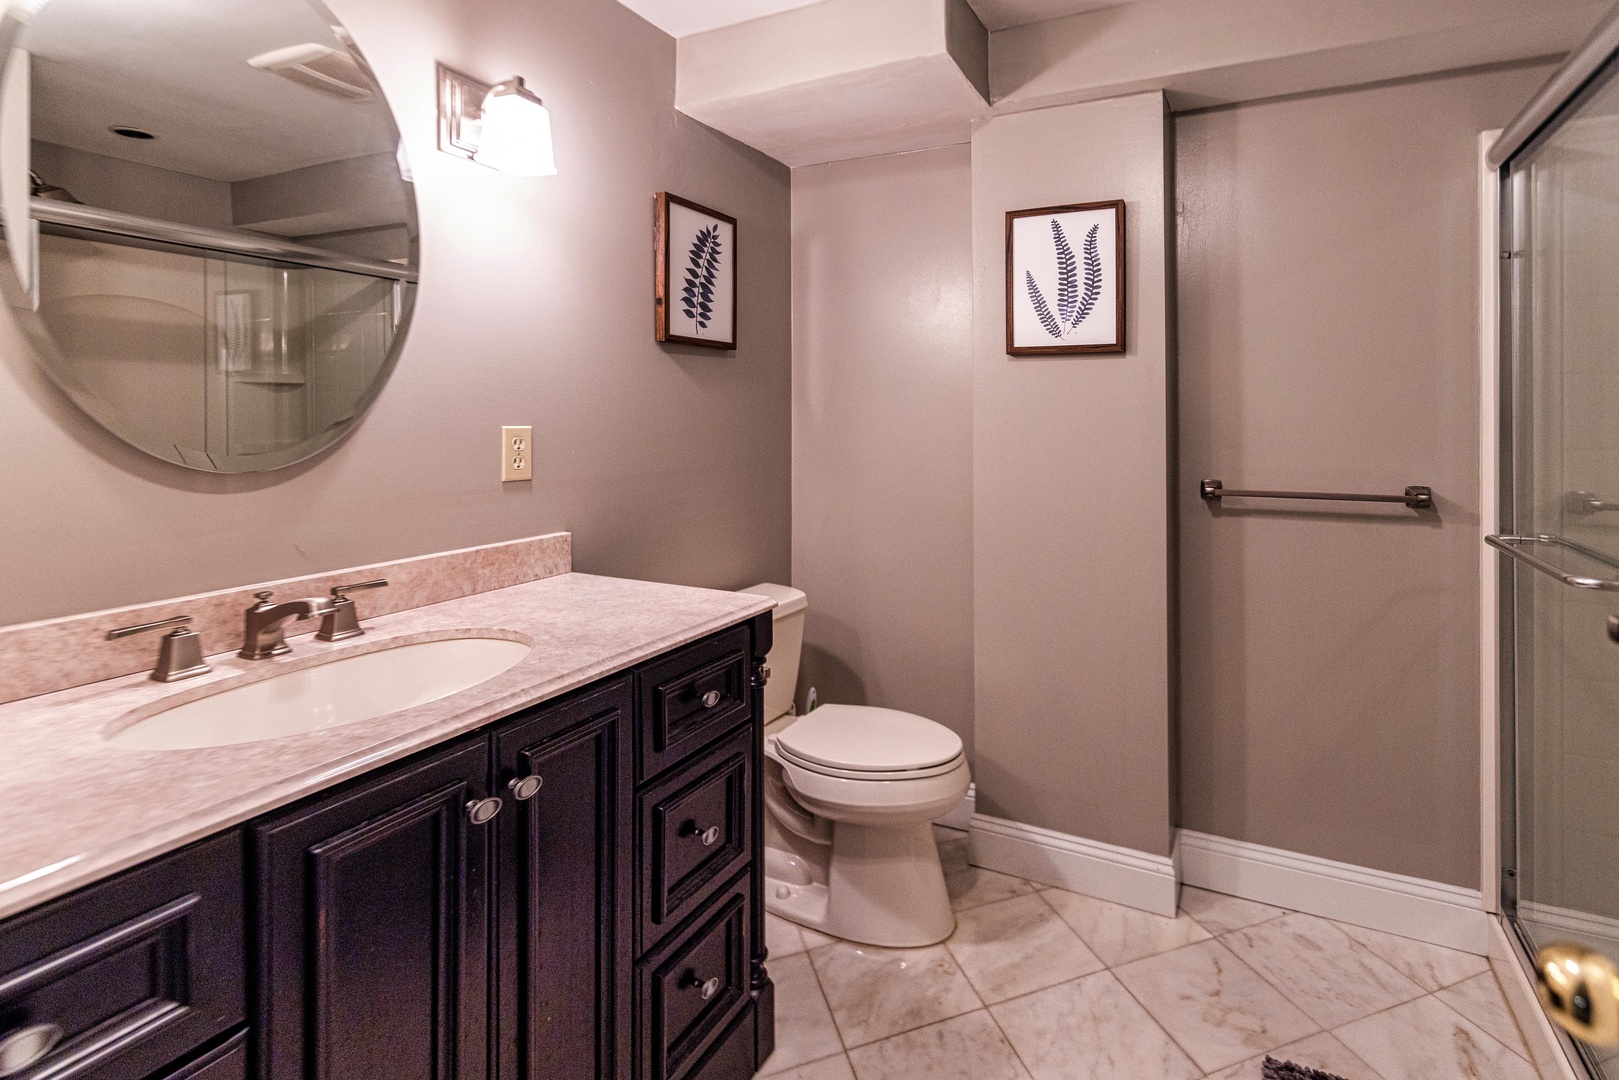 This lower-level full bath includes a large single vanity & glass shower